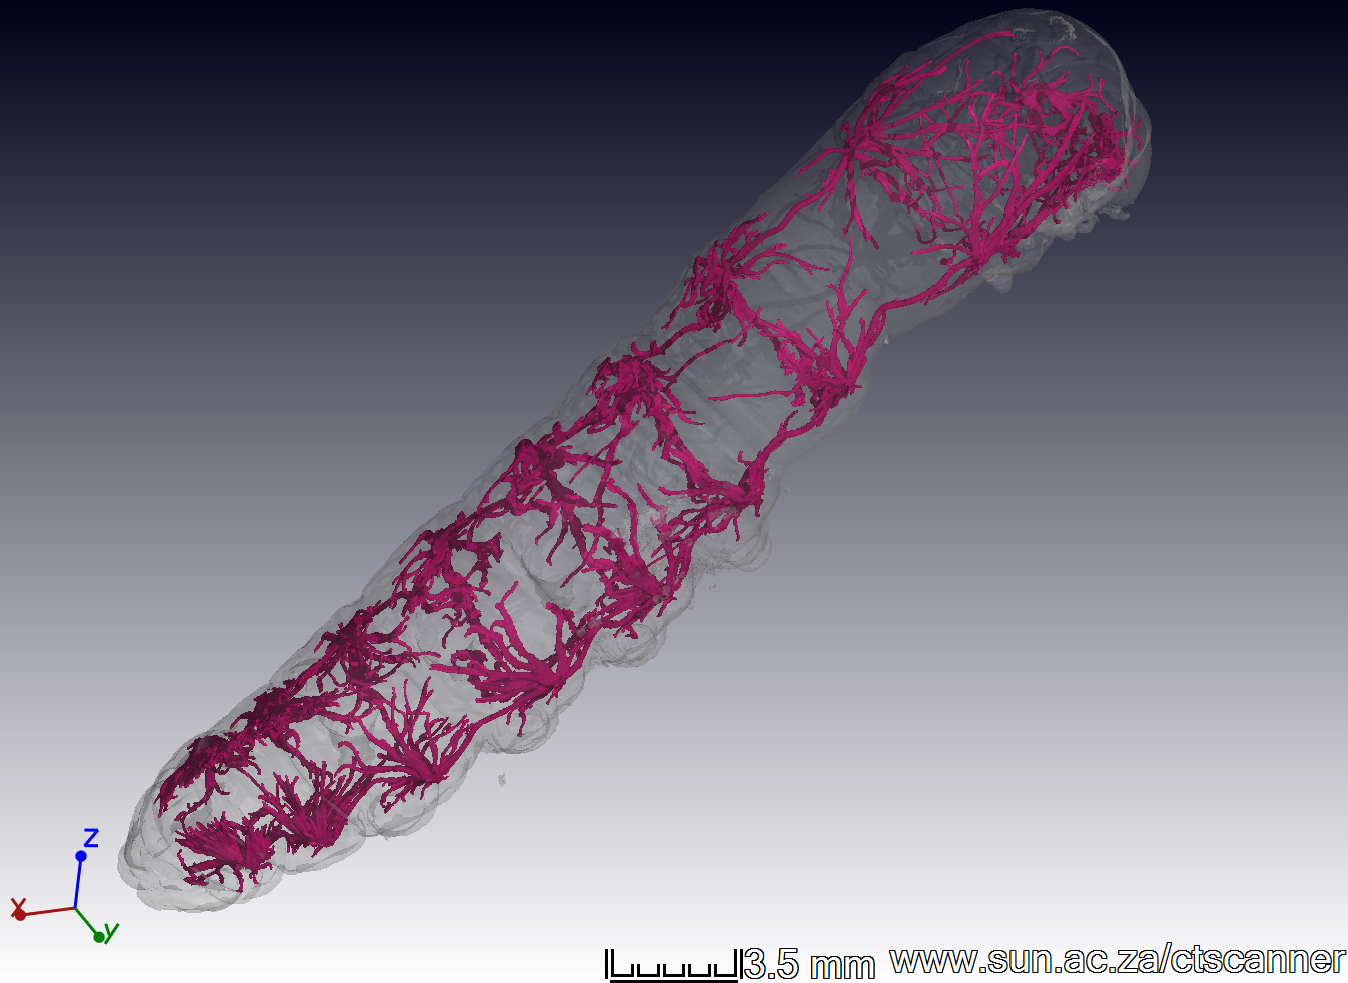 X-ray 3D CT scan of a silkworm (Bombyx mori) larval tracheal system (scale bar shows 3.5 mm.) Image taken by Leigh Boardman with technical assistance from Anton Du Plessis, Central Analytical Facilities at Stellenbosch University.